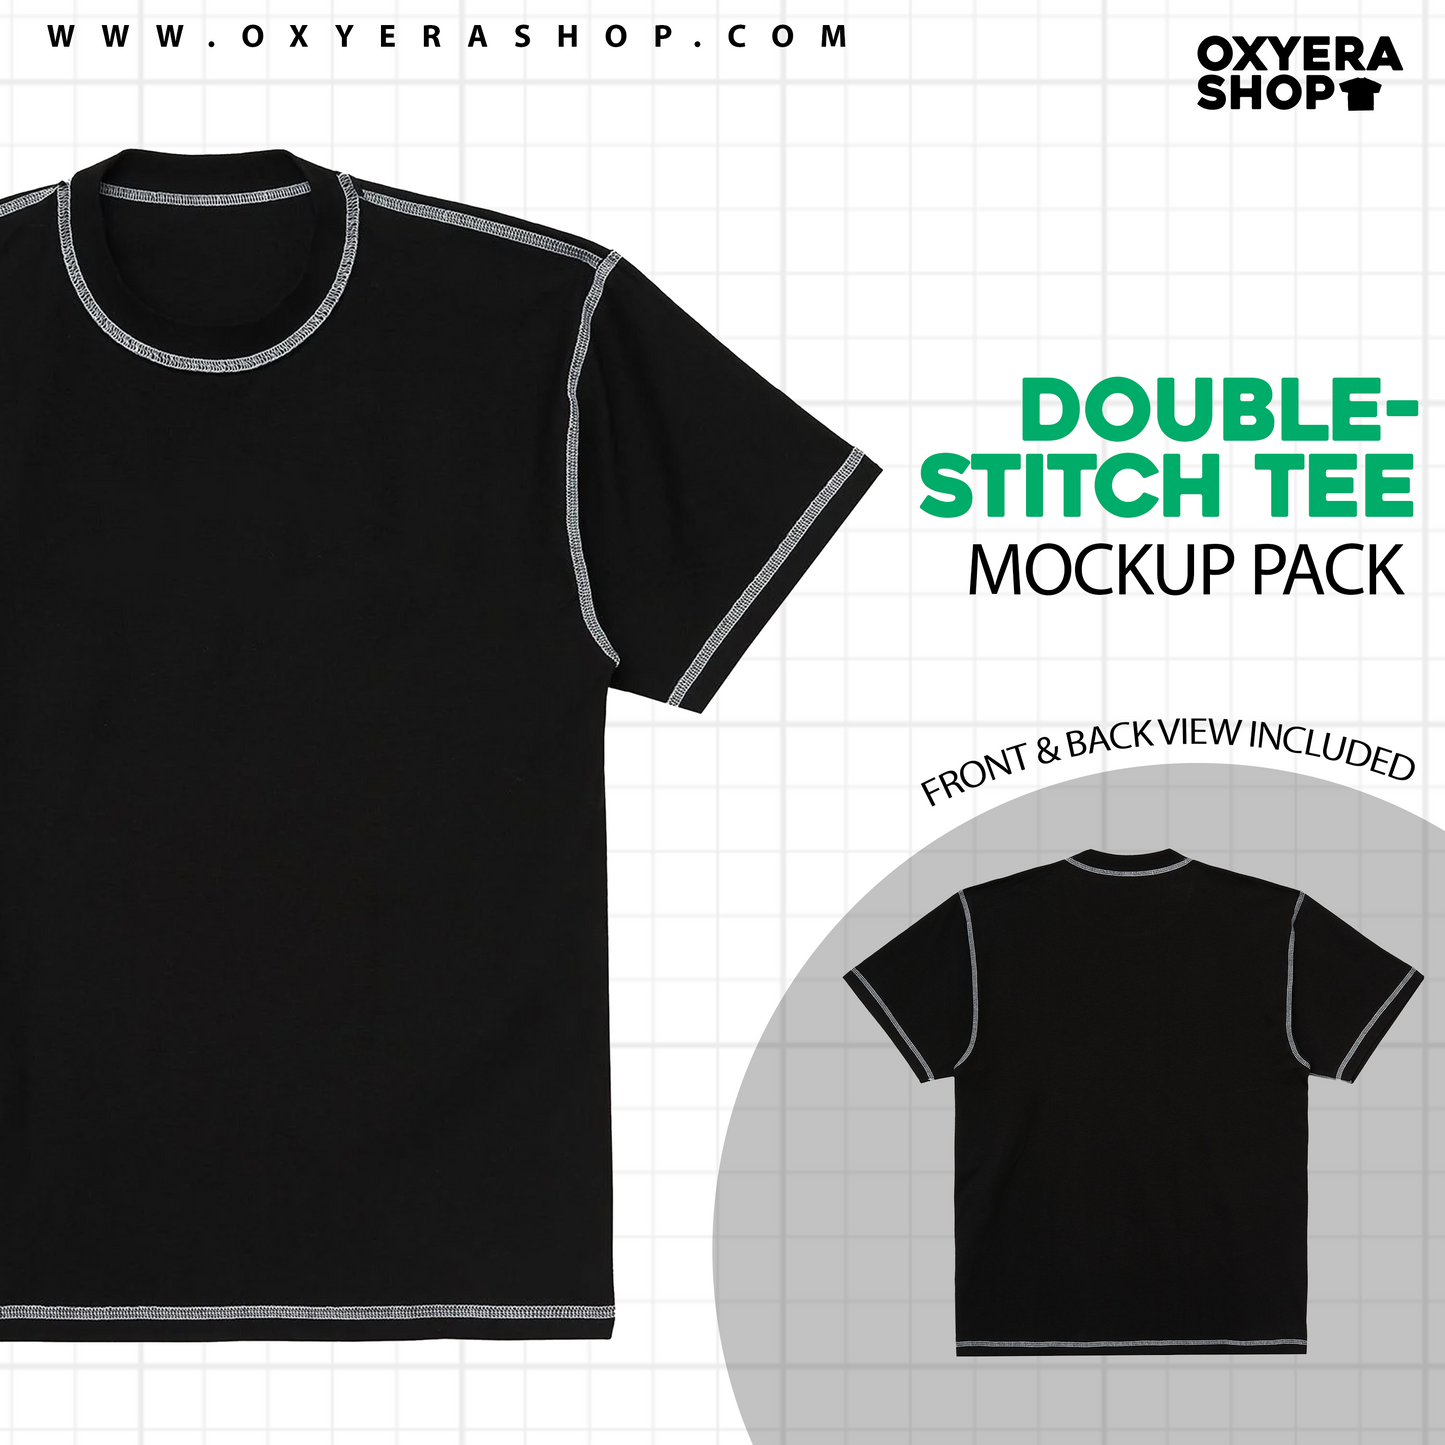 DOUBLE-STITCH TEE MOCKUP PACK